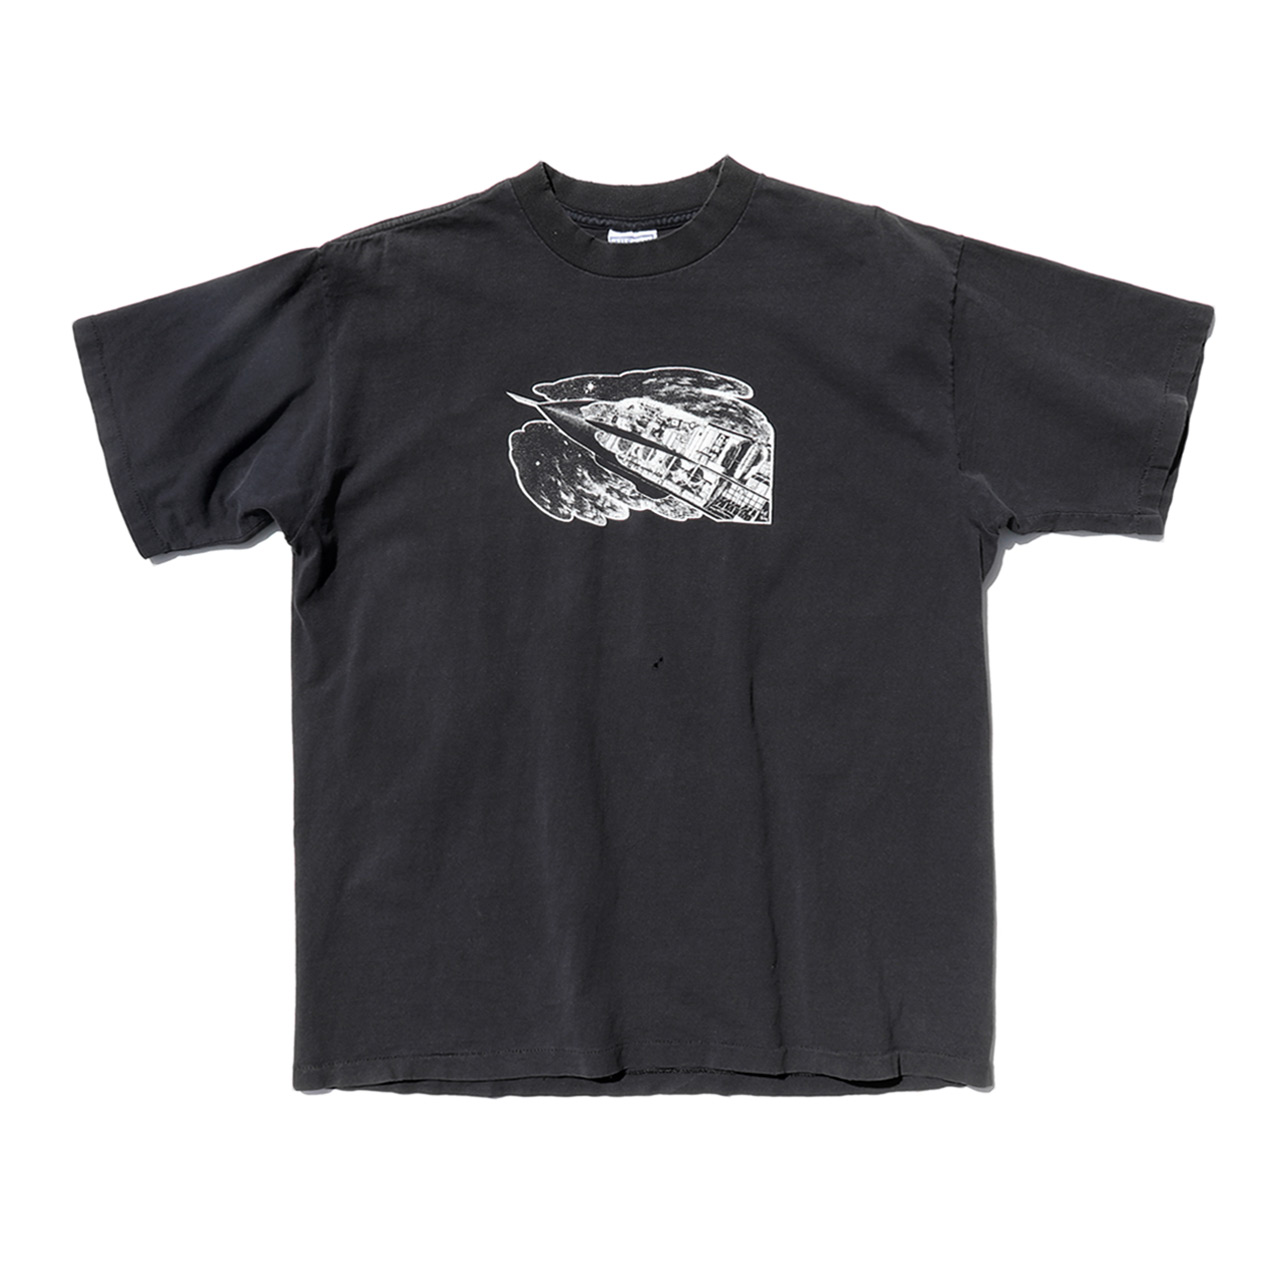 POST JUNK / 90's PEARL JAM ”PROGRAMME TOUR” USA製 ツアーTシャツ [XL]